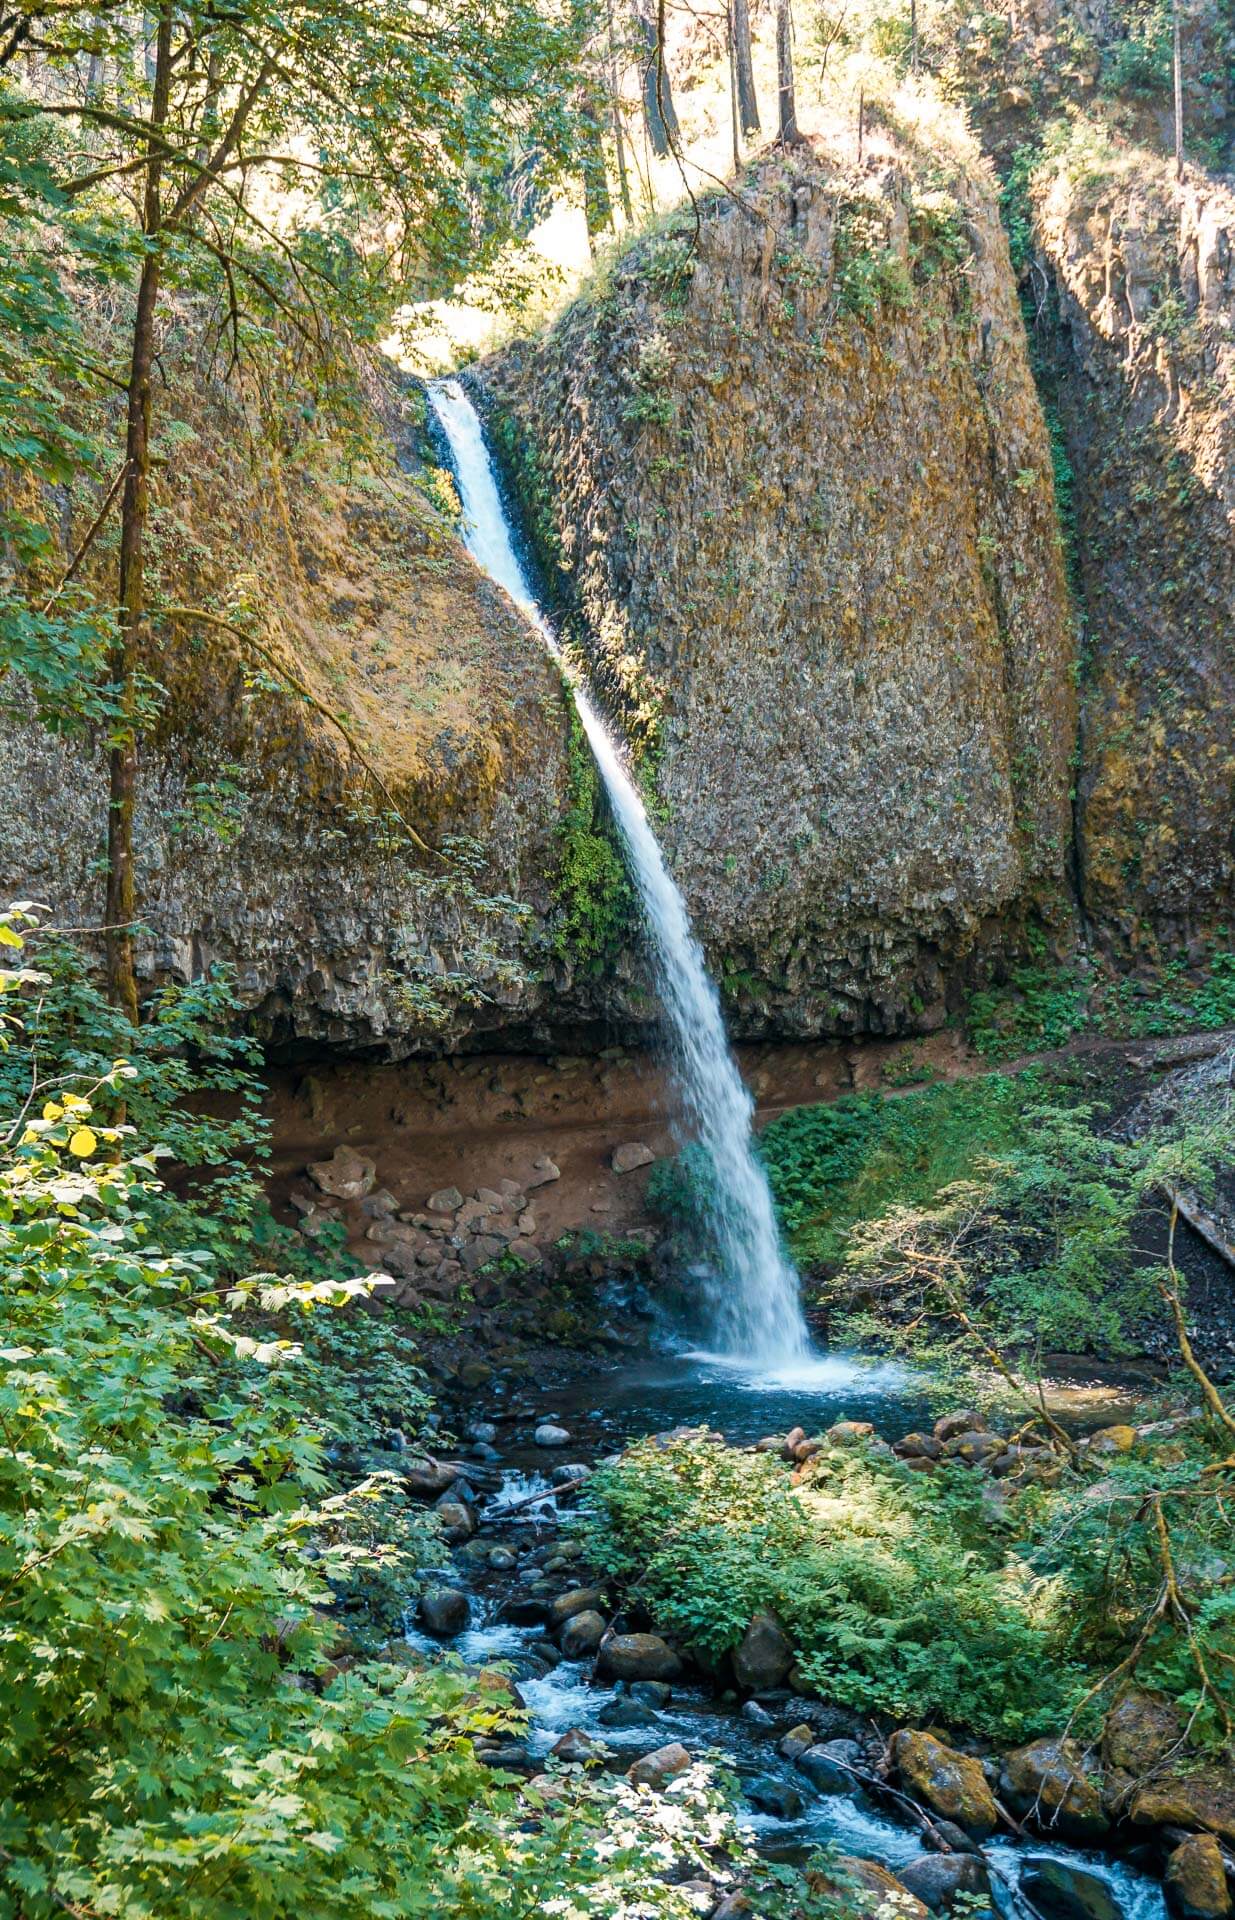 Ponytail Falls, a plunging waterfall in Columbia River Gorge